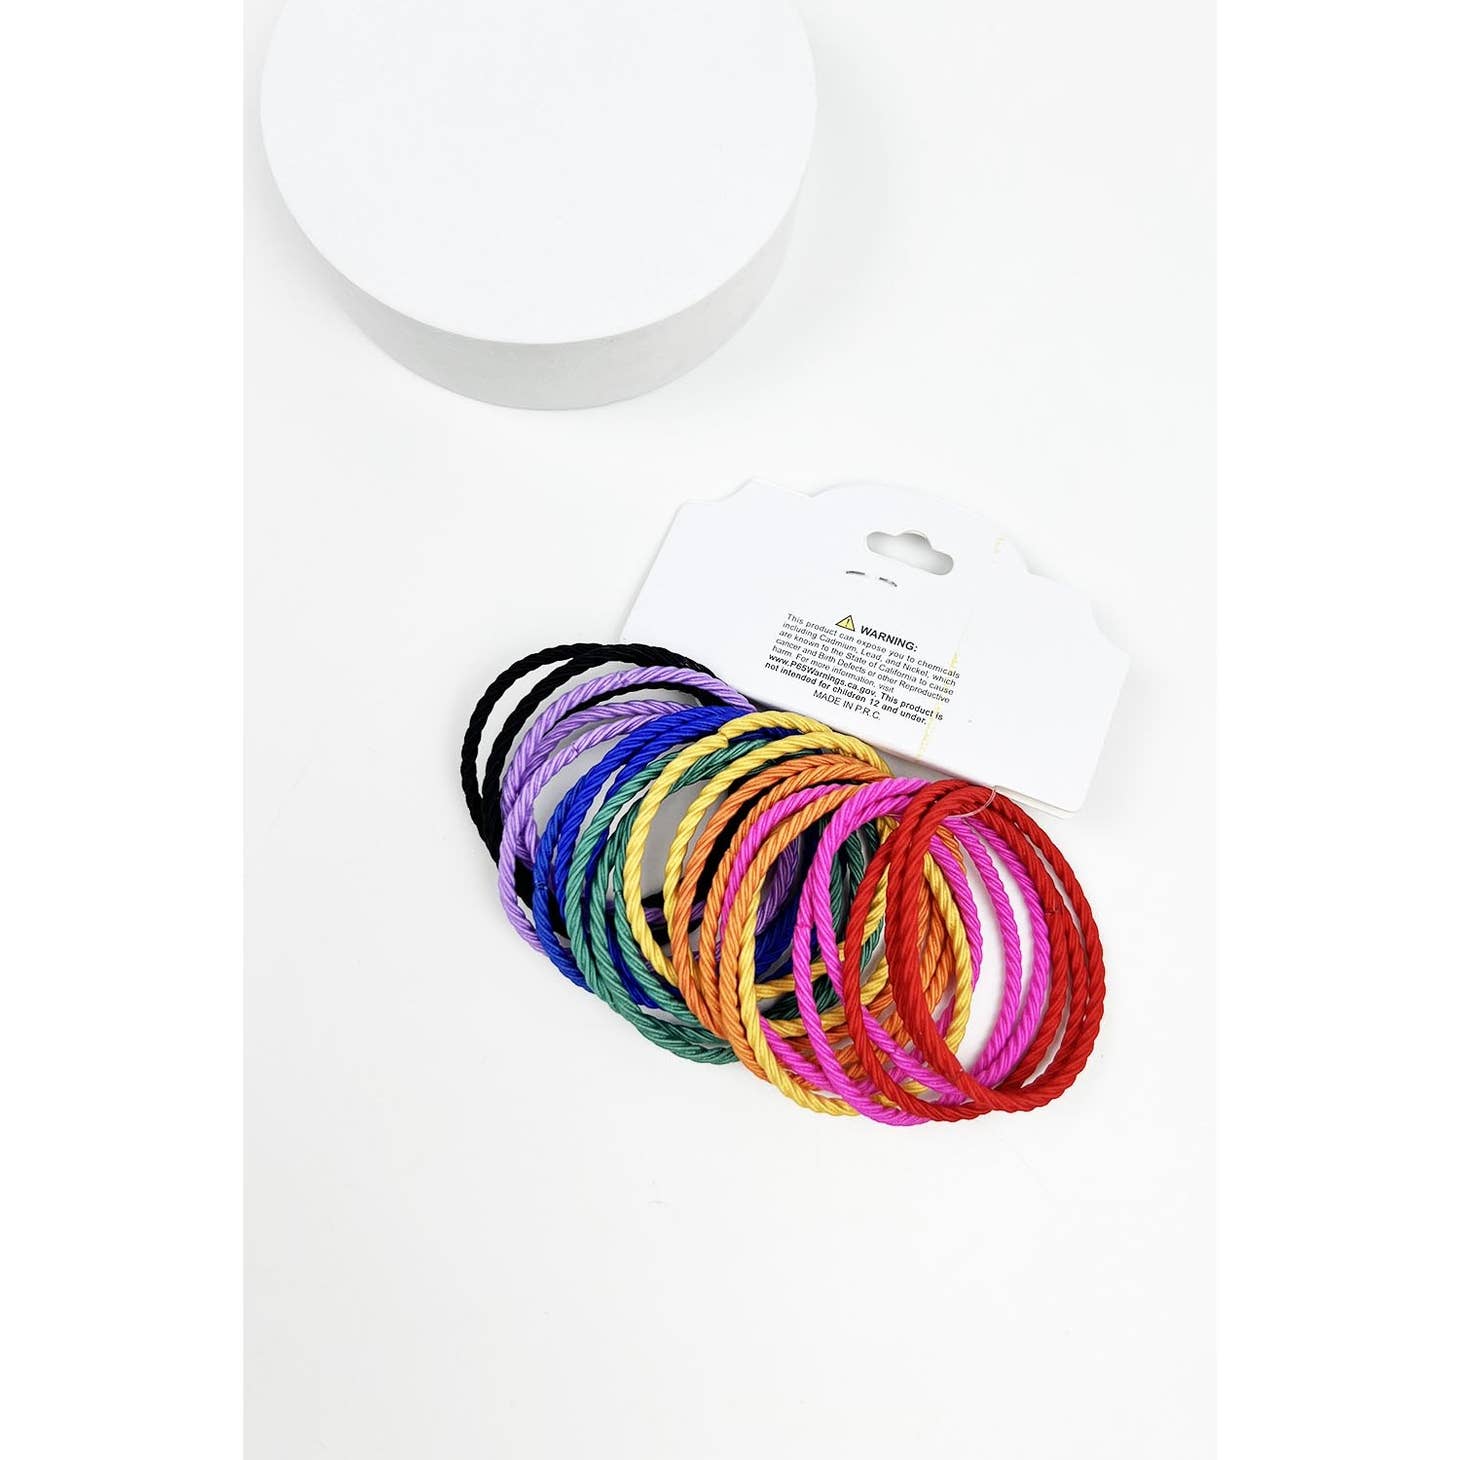 Twisted Elastic Hair Tie Set - Bright Colors